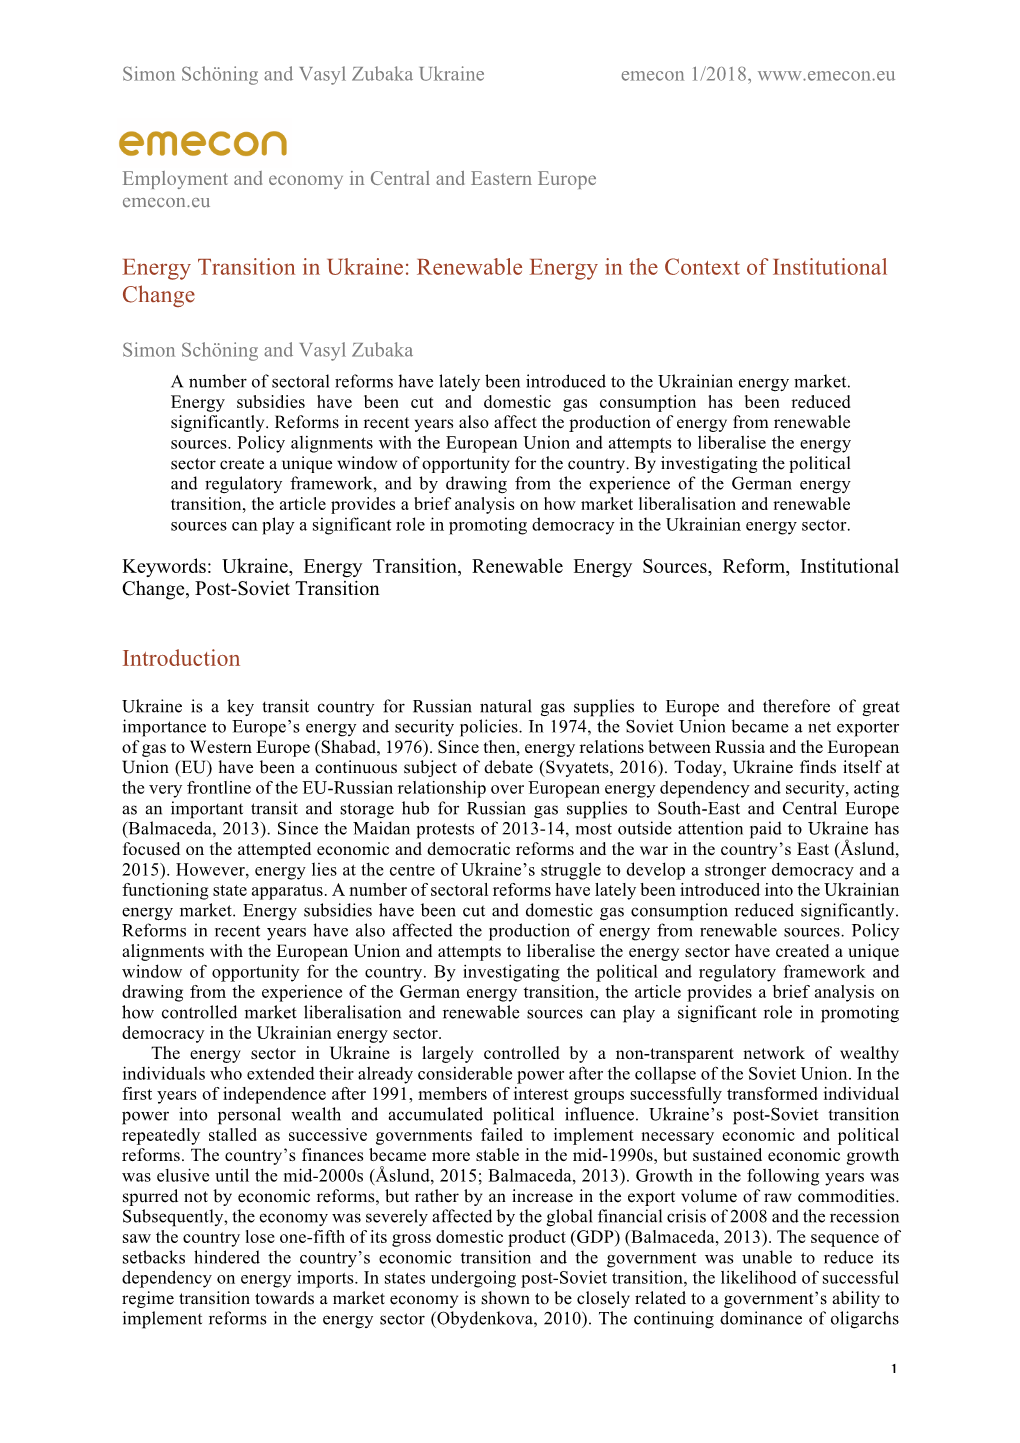 Renewable Energy in the Context of Institutional Change Introduction